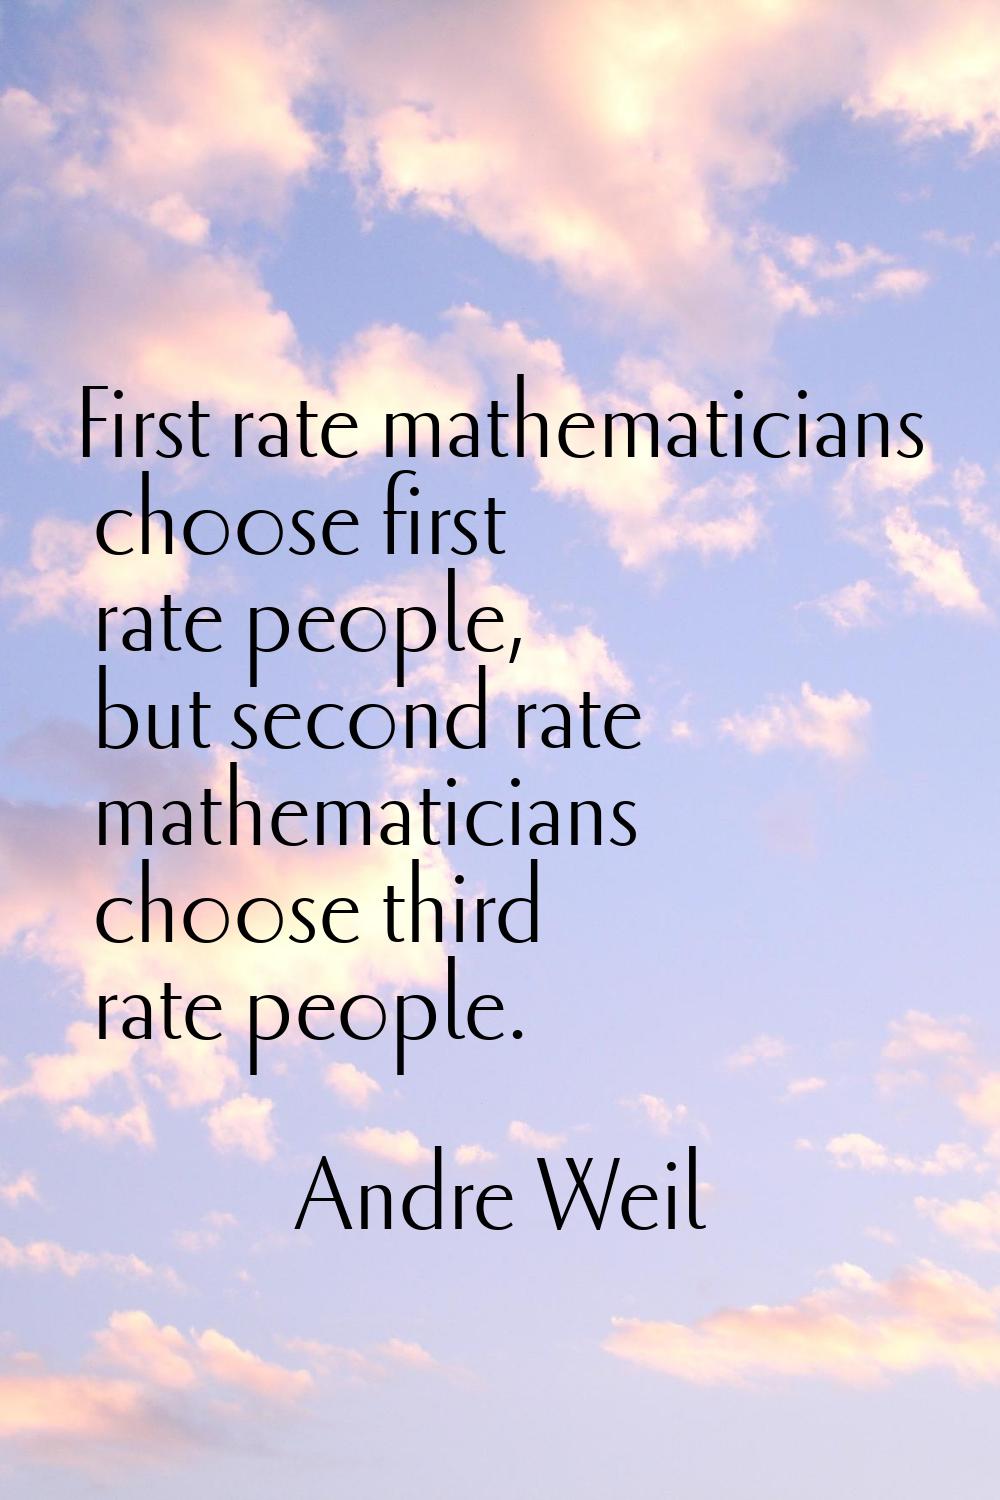 First rate mathematicians choose first rate people, but second rate mathematicians choose third rat